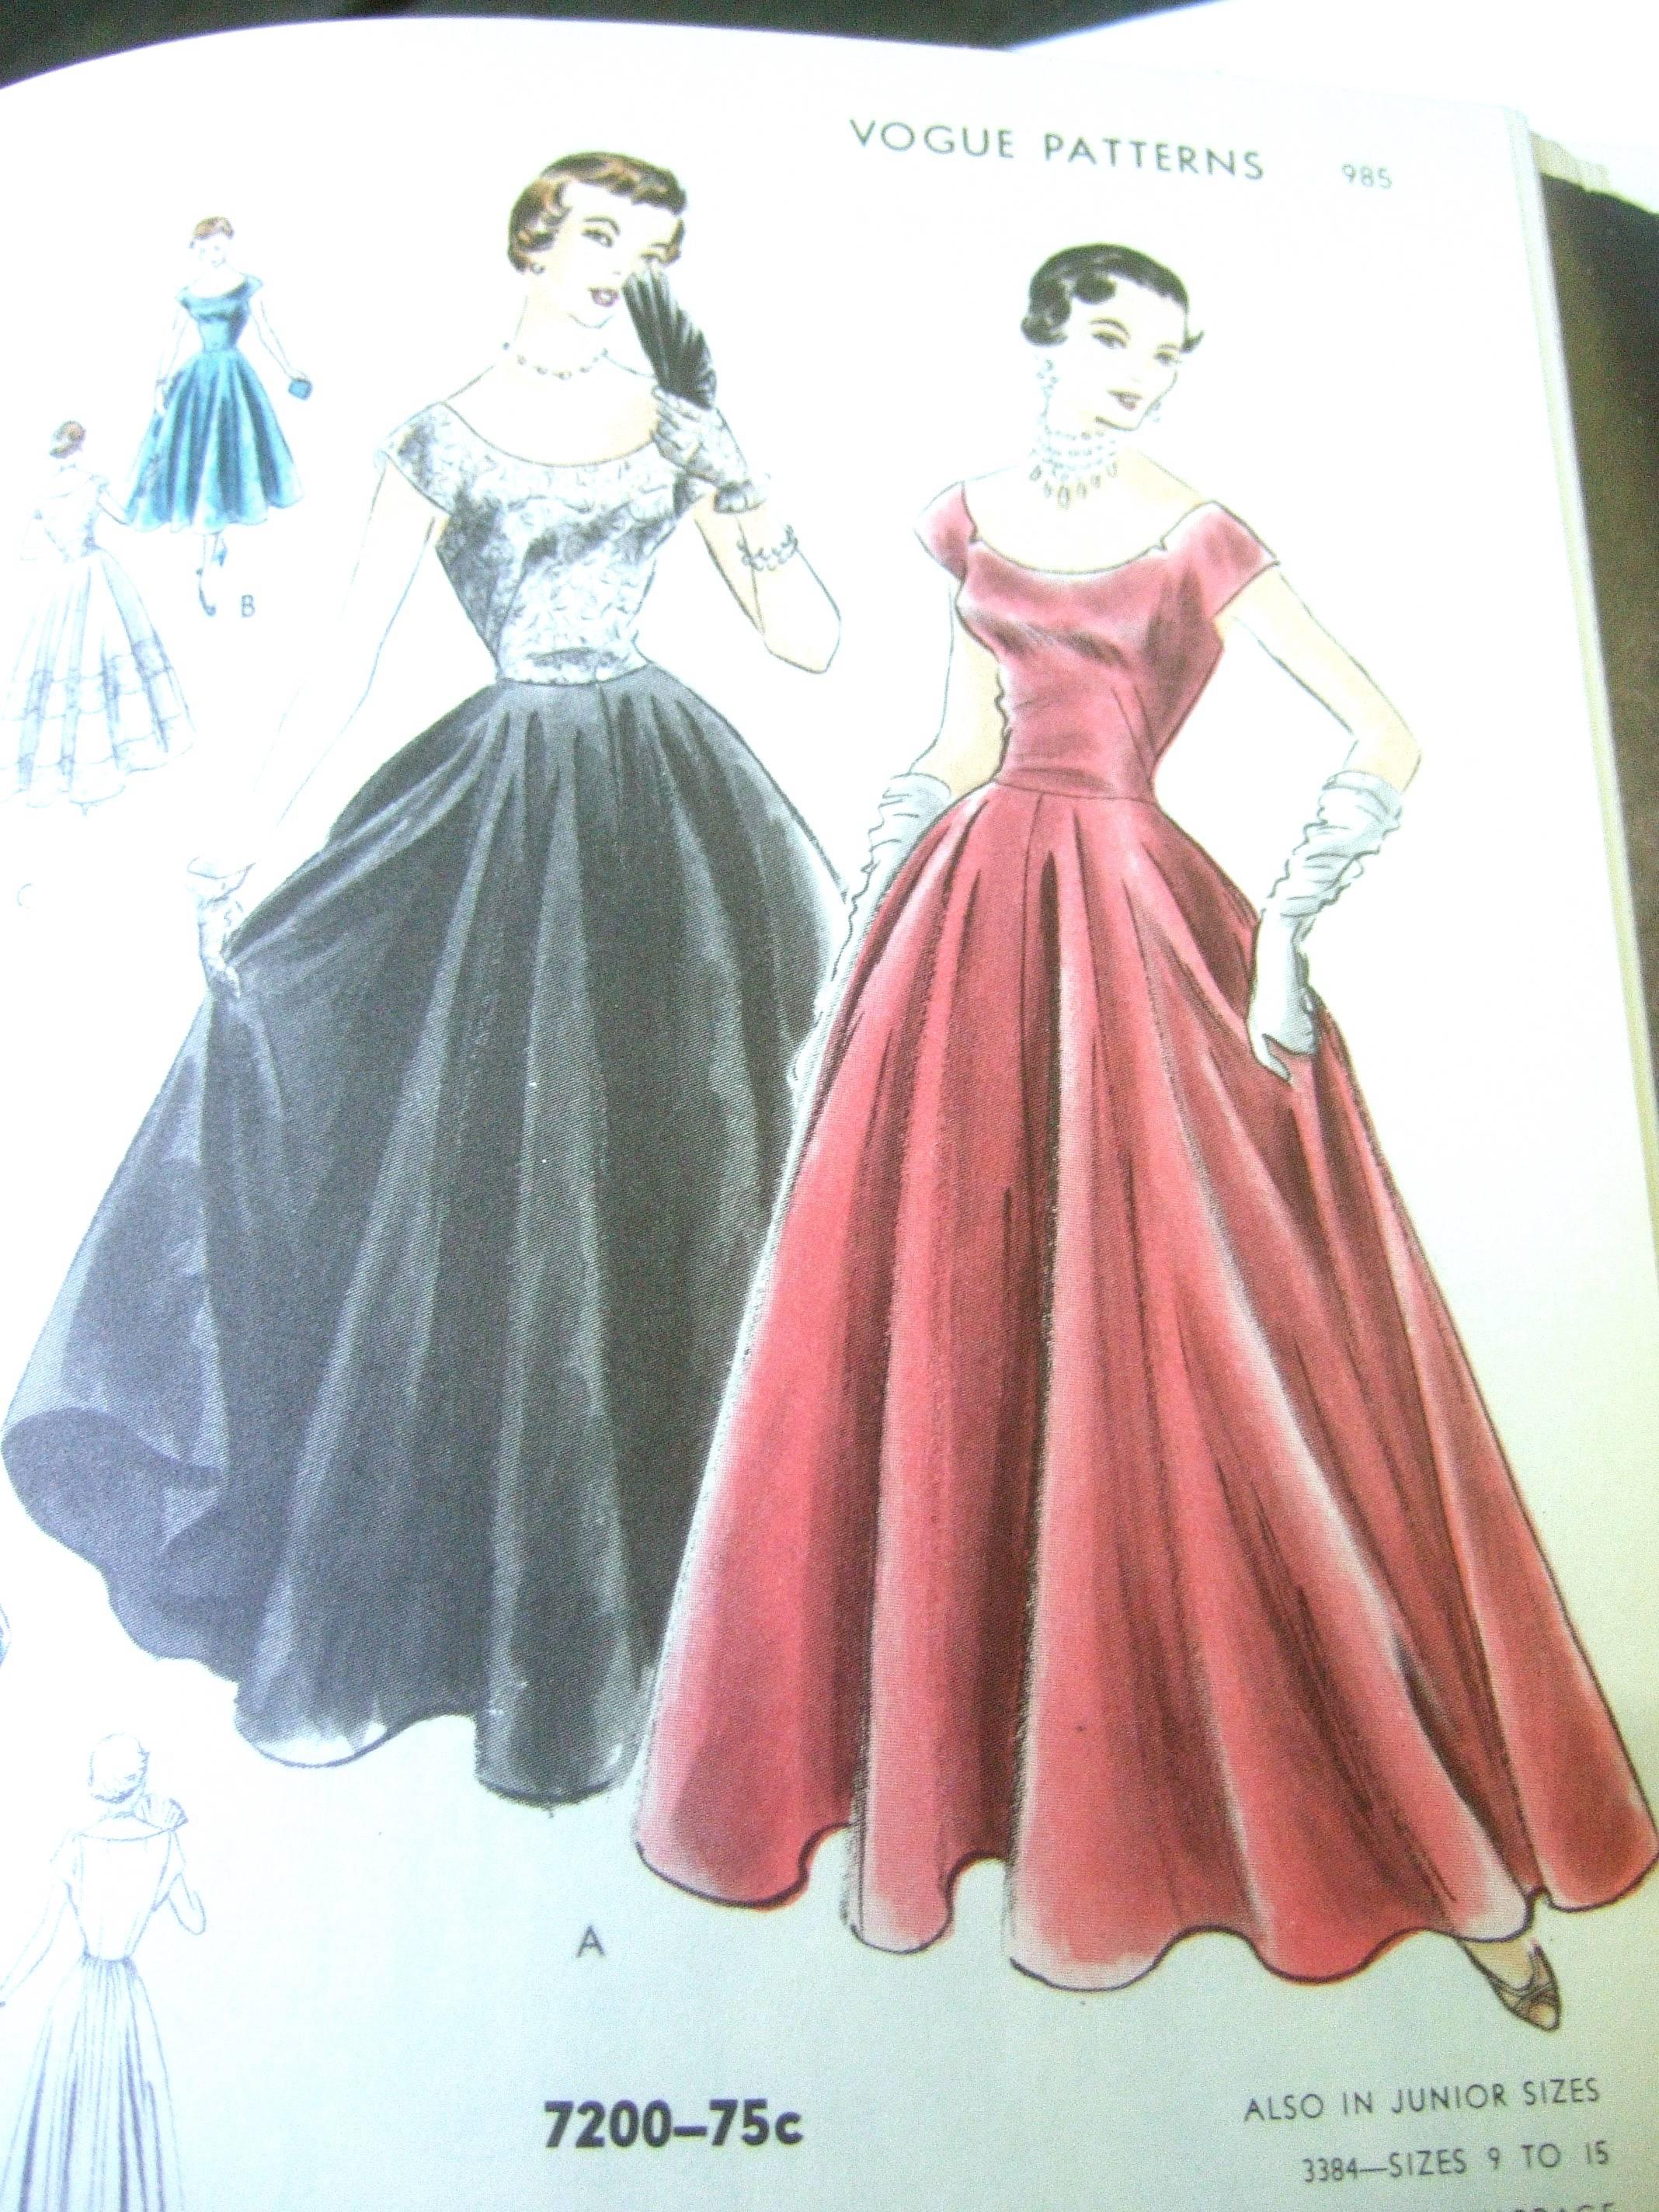 1952 Vogue Pattern Book with French Couture Illustrations   2